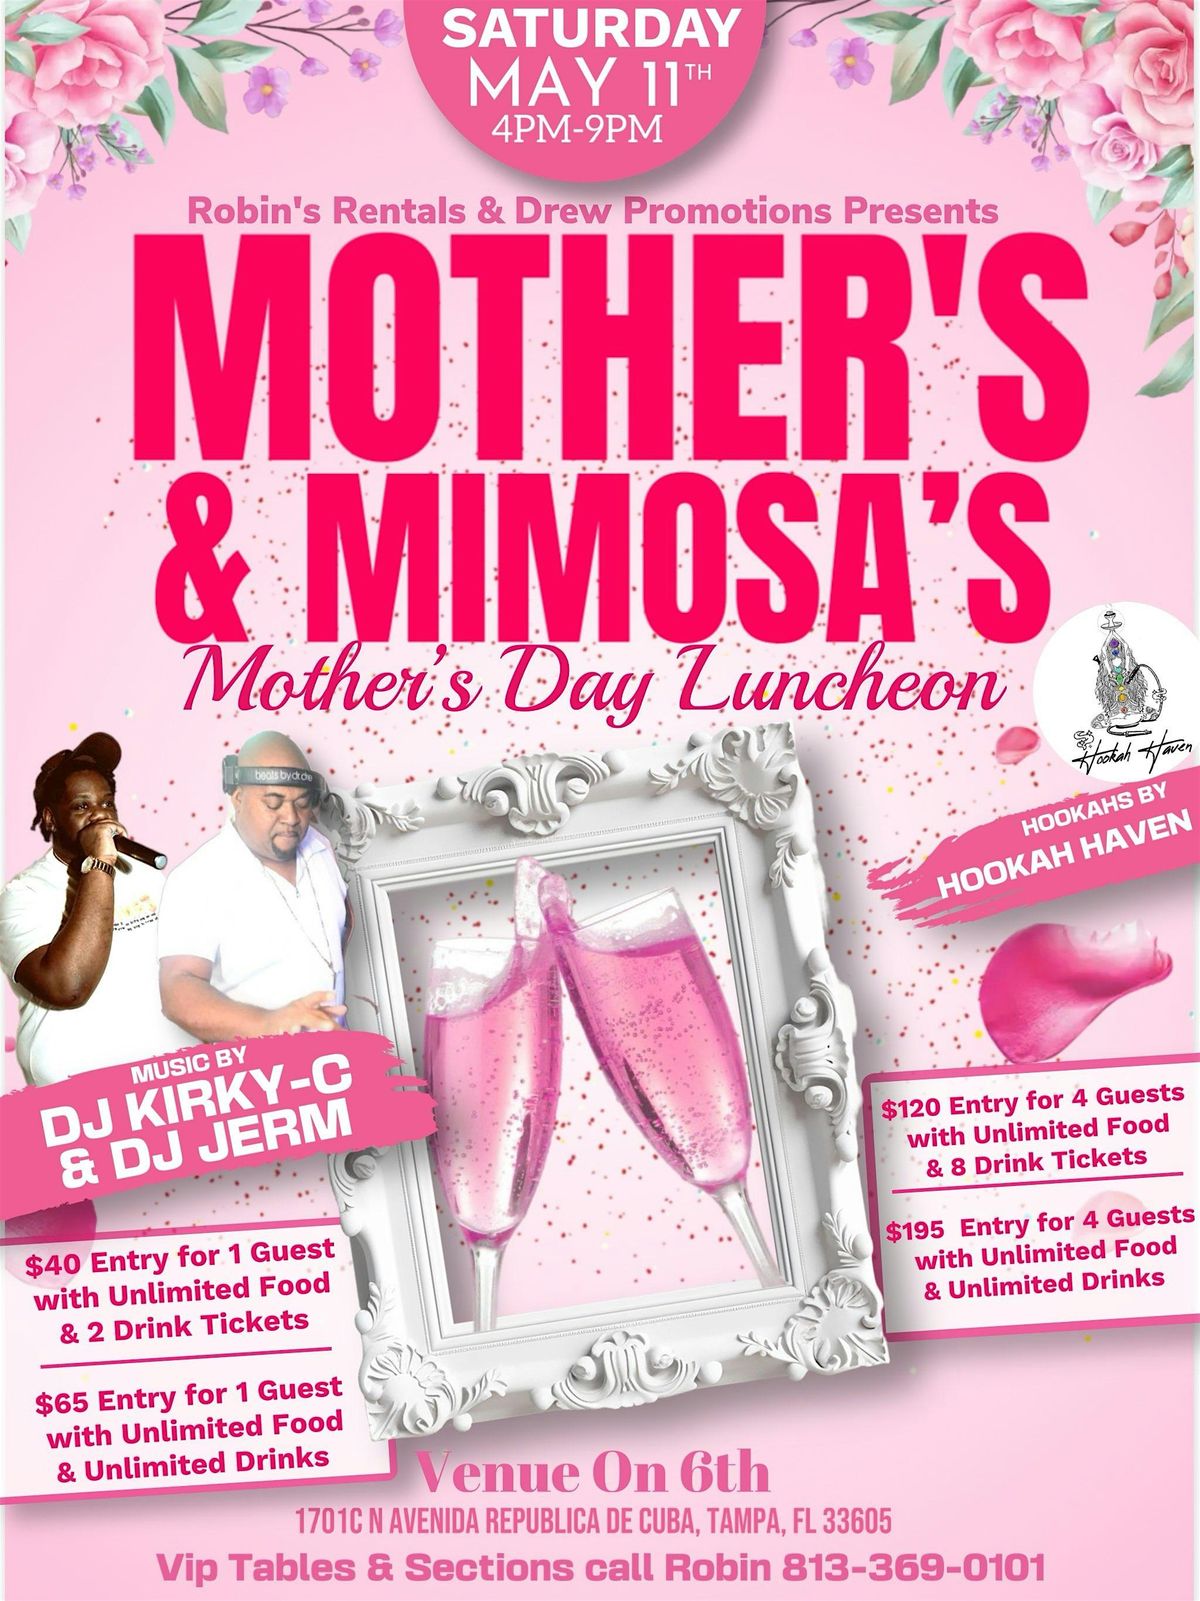 Mothers And Mimosas: Mother's Day Luncheon